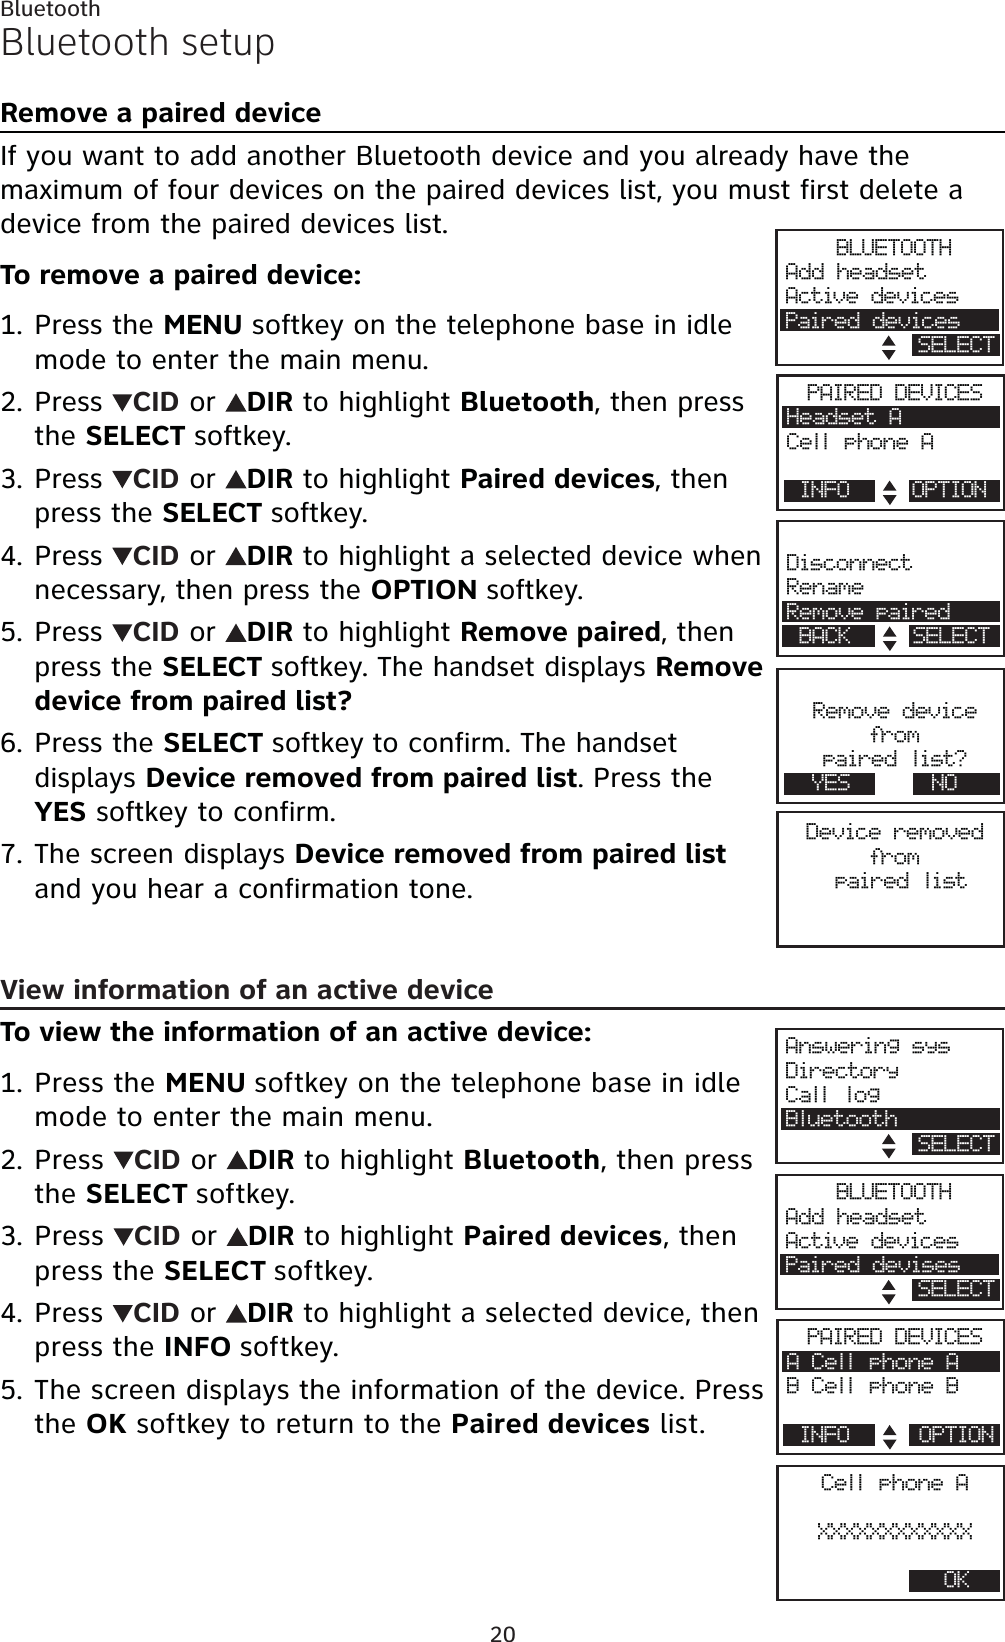 20BluetoothBluetooth setupRemove a paired deviceIf you want to add another Bluetooth device and you already have the maximum of four devices on the paired devices list, you must first delete a device from the paired devices list.To remove a paired device:Press the MENU softkey on the telephone base in idle mode to enter the main menu.Press  CID or  DIR to highlight Bluetooth, then press the SELECT softkey.Press  CID or  DIR to highlight Paired devices, then press the SELECT softkey.Press  CID or  DIR to highlight a selected device when necessary, then press the OPTION softkey.Press  CID or  DIR to highlight Remove paired, then press the SELECT softkey. The handset displays Remove device from paired list? Press the SELECT softkey to confirm. The handset displays Device removed from paired list. Press the YES softkey to confirm.The screen displays Device removed from paired listand you hear a confirmation tone.View information of an active deviceTo view the information of an active device:Press the MENU softkey on the telephone base in idle mode to enter the main menu.Press  CID or  DIR to highlight Bluetooth, then press the SELECT softkey.Press  CID or  DIR to highlight Paired devices, then press the SELECT softkey.Press CID or  DIRto highlight a selected device, then press the INFO softkey.The screen displays the information of the device. Press the OK softkey to return to the Paired devices list.1.2.3.4.5.6.7.1.2.3.4.5.Device removedfrompaired listDisconnectRenameRemove pairedBACK SELECTBLUETOOTHAdd headsetActive devicesPaired devicesSELECTPAIRED DEVICESHeadset ACell phone ABluetoothINFO OPTIONRemove devicefrompaired list?YES NOCell phone AXXXXXXXXXXXXOKPAIRED DEVICESA Cell phone ABCellphoneBINFO OPTIONAnswering sysDirectoryCall logBluetoothB SELECTBLUETOOTHAdd headsetActive devicesPaired devisesSELECT